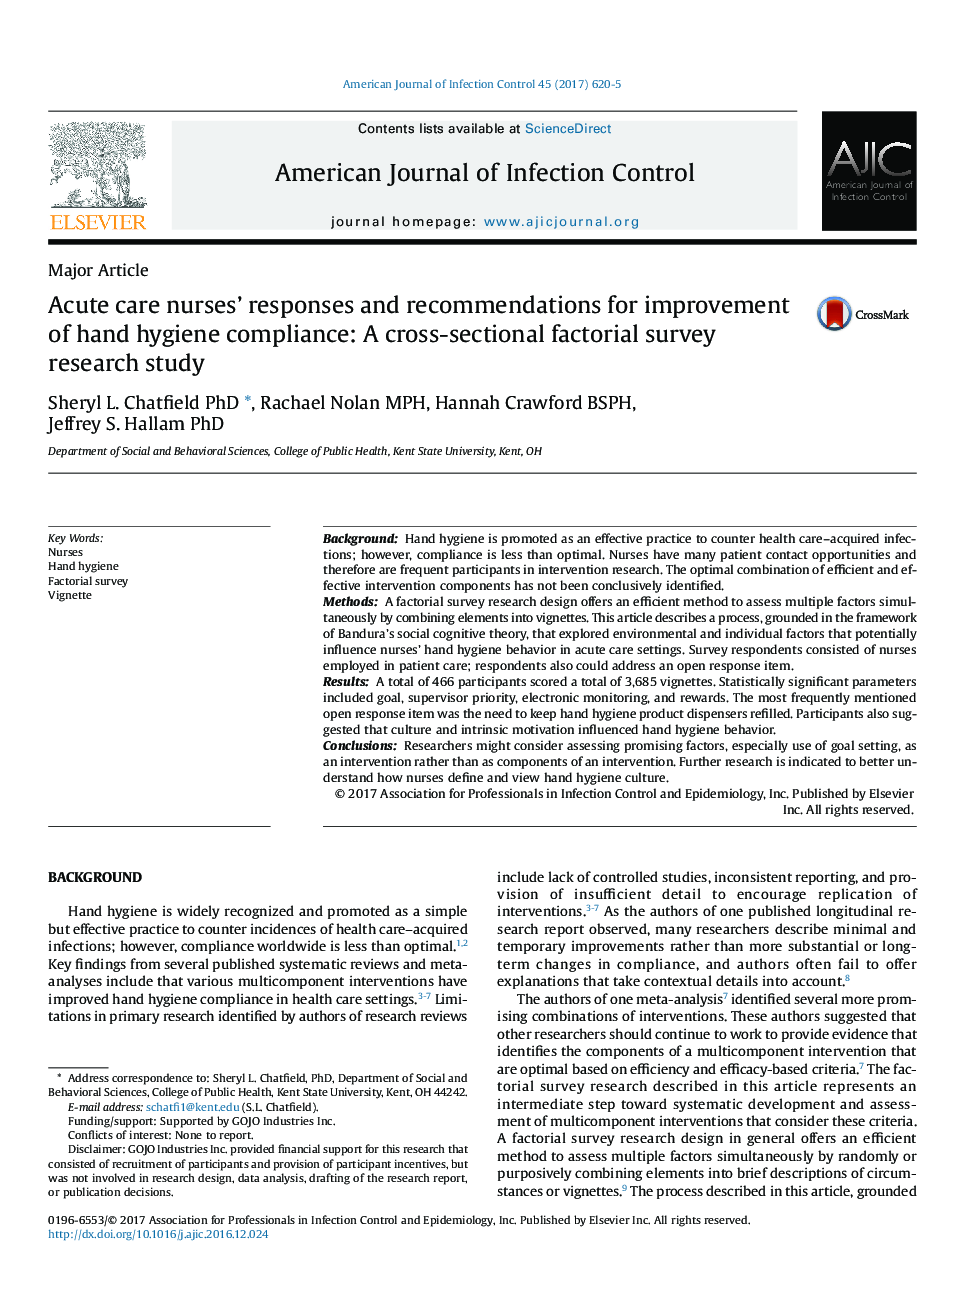 Acute care nurses' responses and recommendations for improvement of hand hygiene compliance: A cross-sectional factorial survey research study